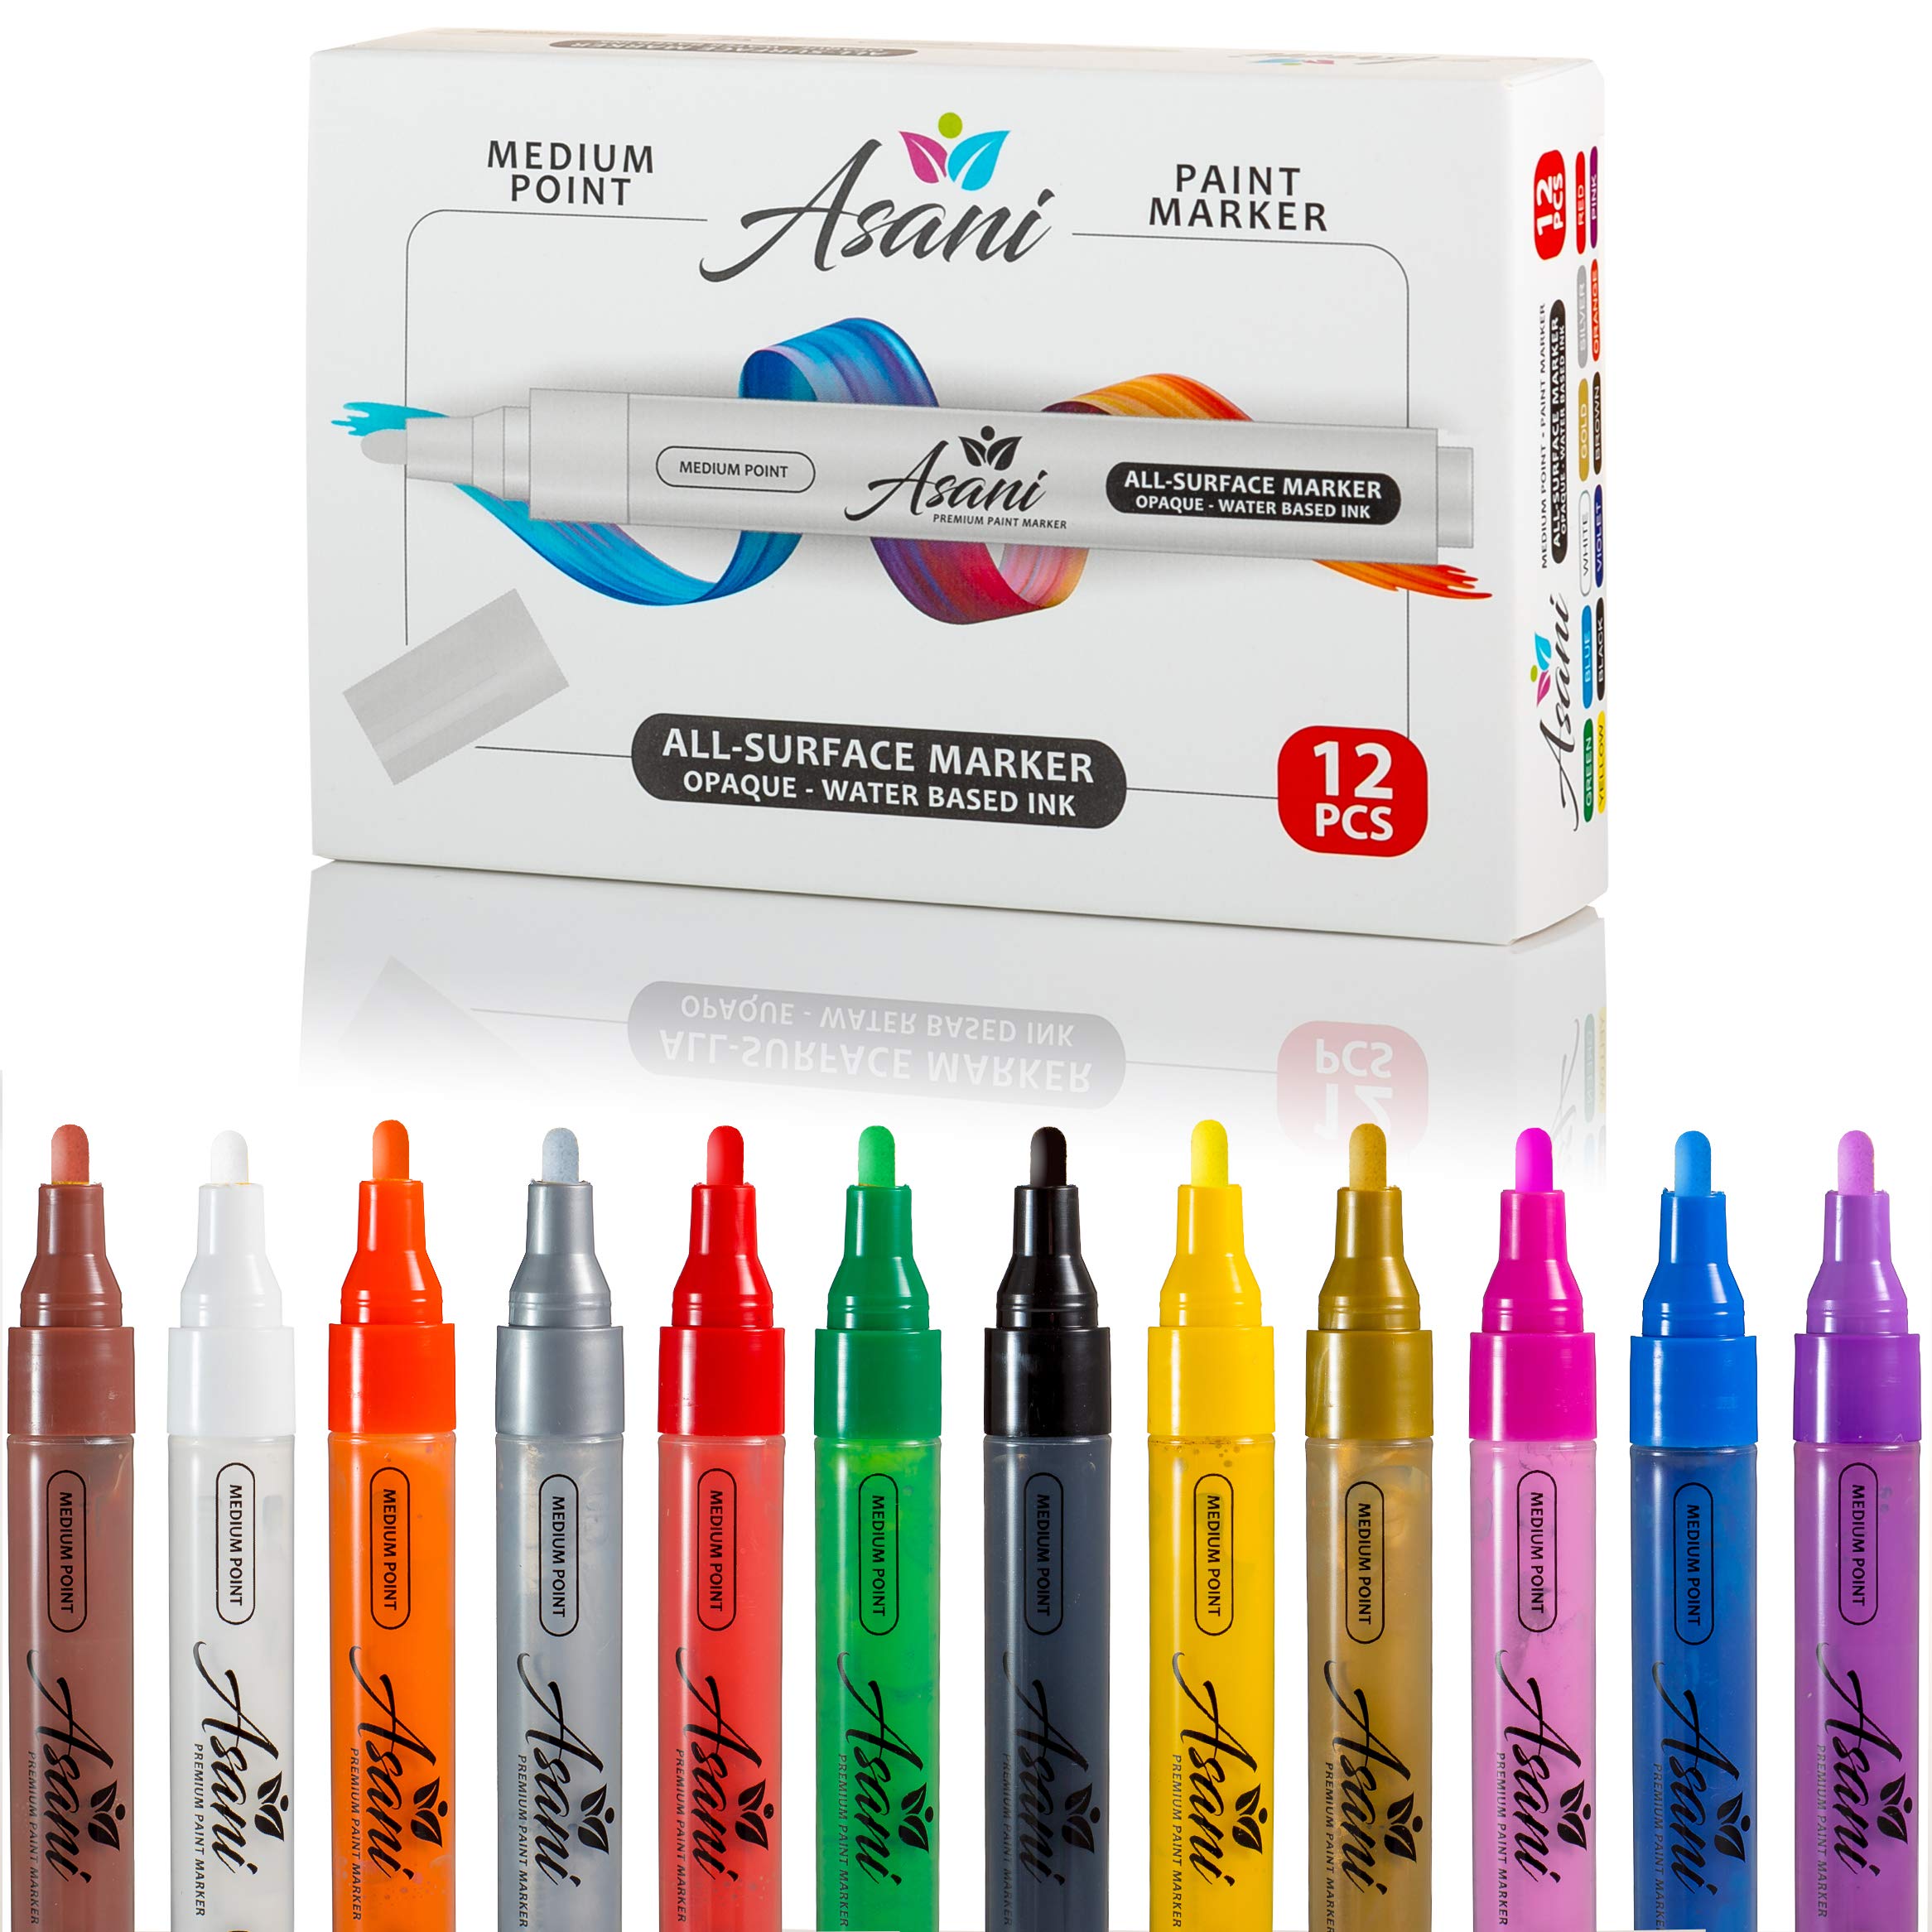 Paint Markers - Acrylic Paint Markers - Art and Craft Supplies